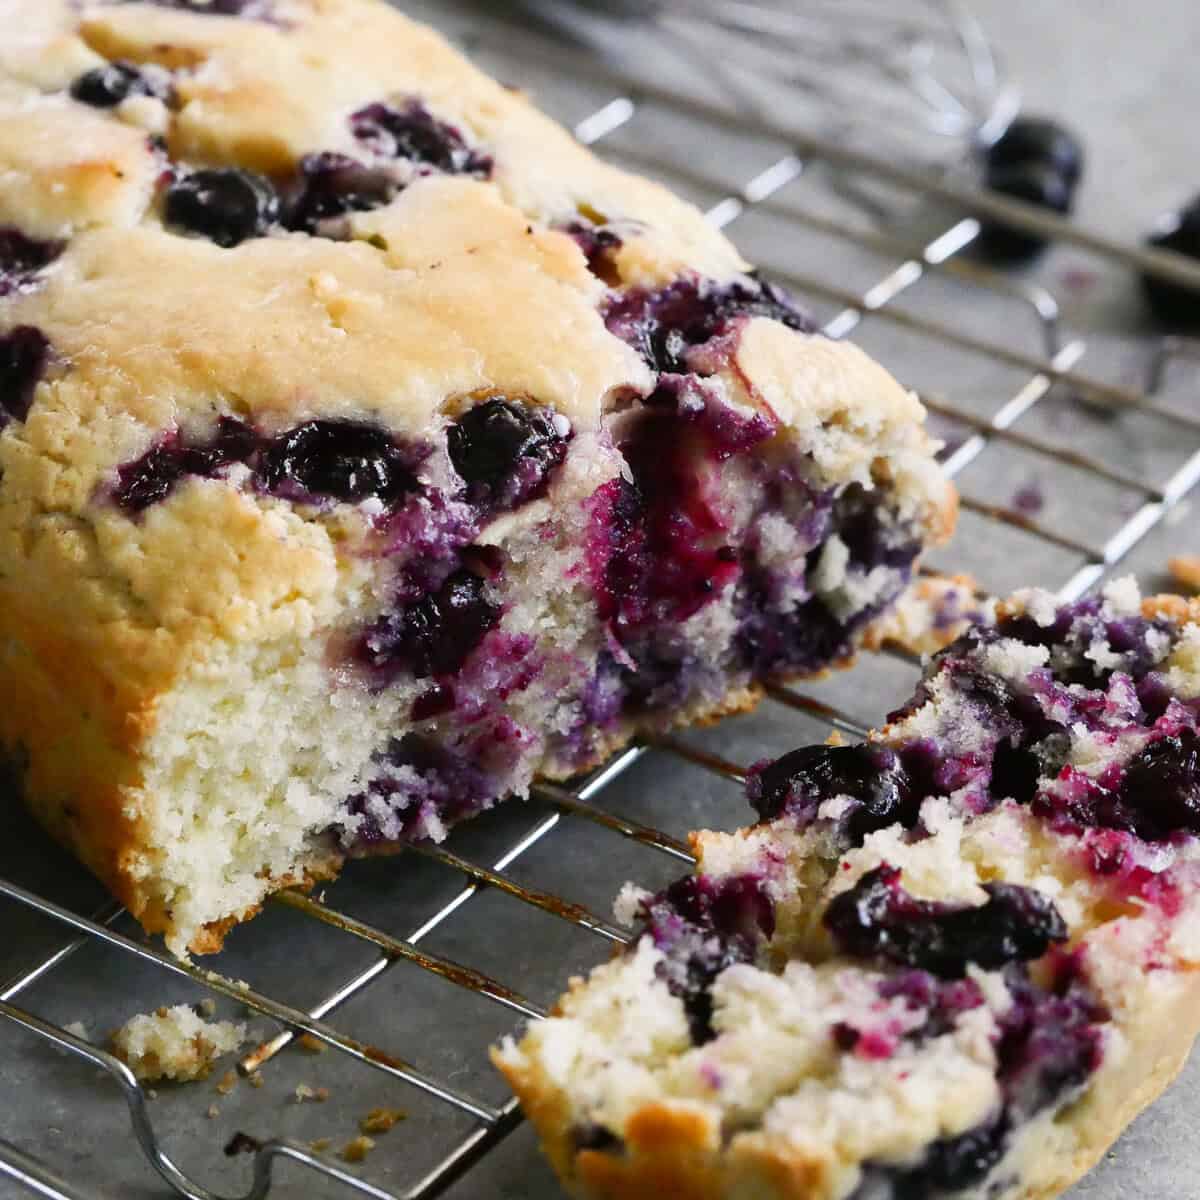 Blueberry Brunch Cake - The Cookin Chicks